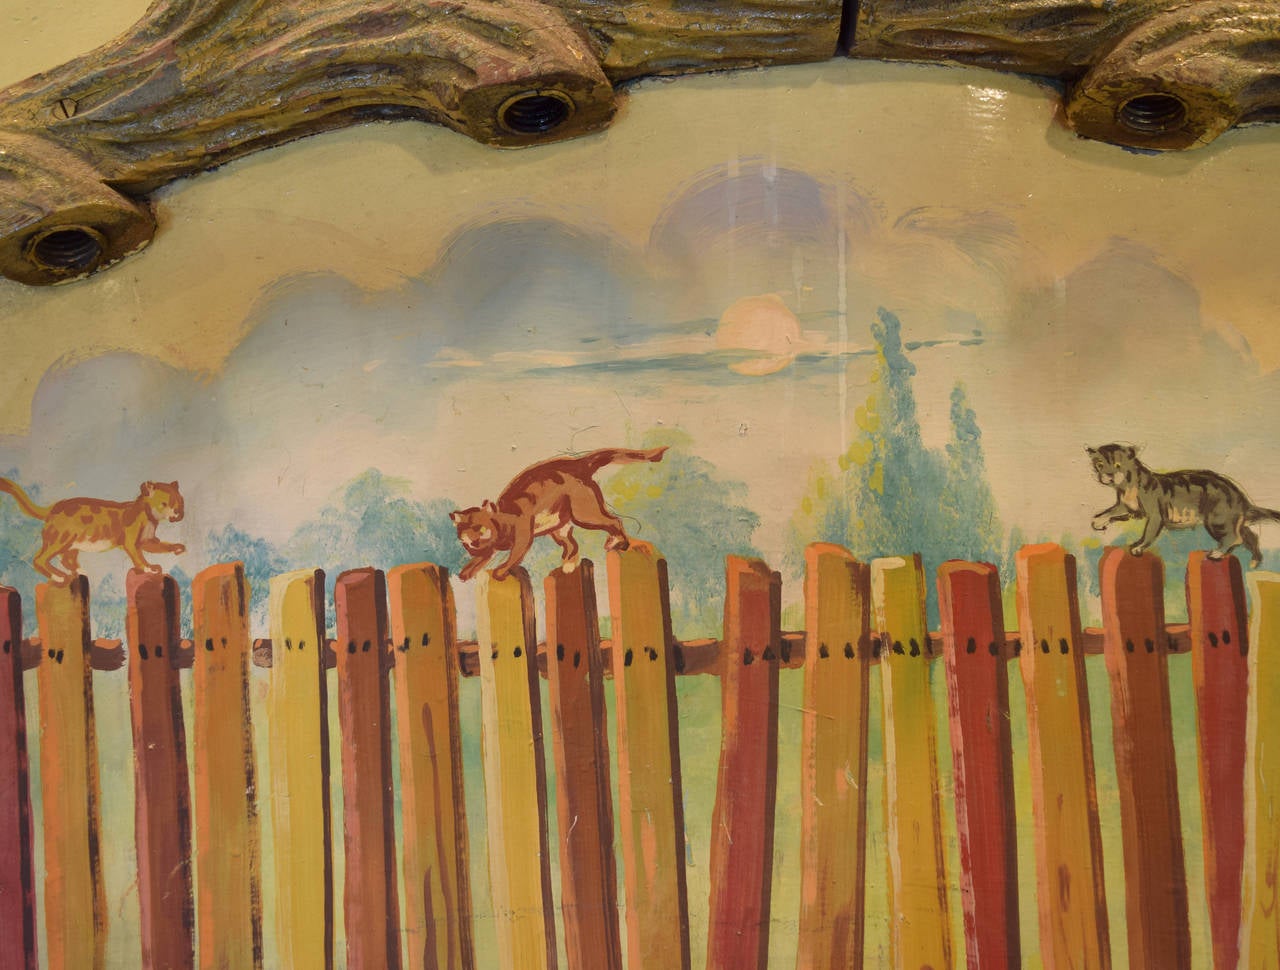 A rounding board from a ride at Riverview Amusement Park (1904-1967) in Chicago, Illinois depicting cats walking atop a fence.